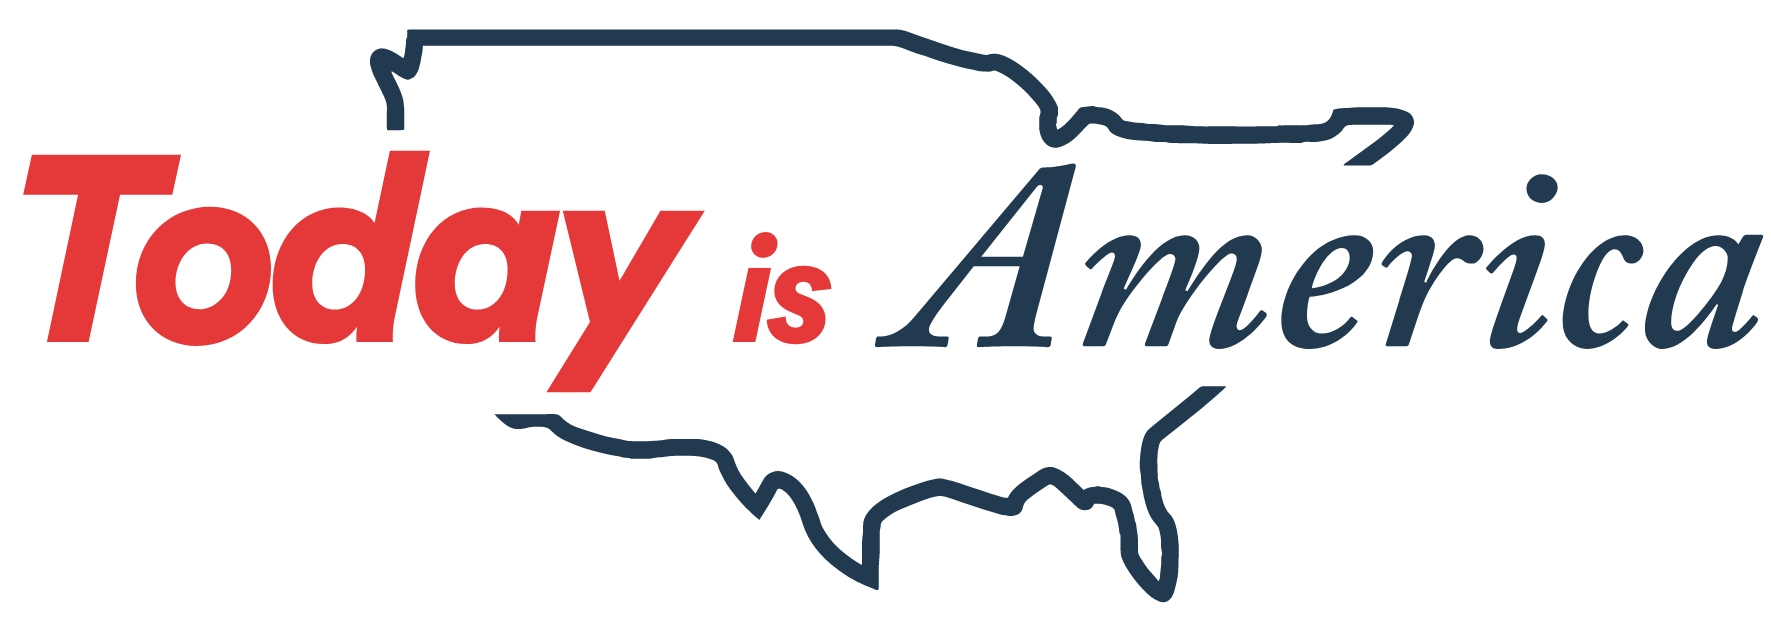 Today is America logo